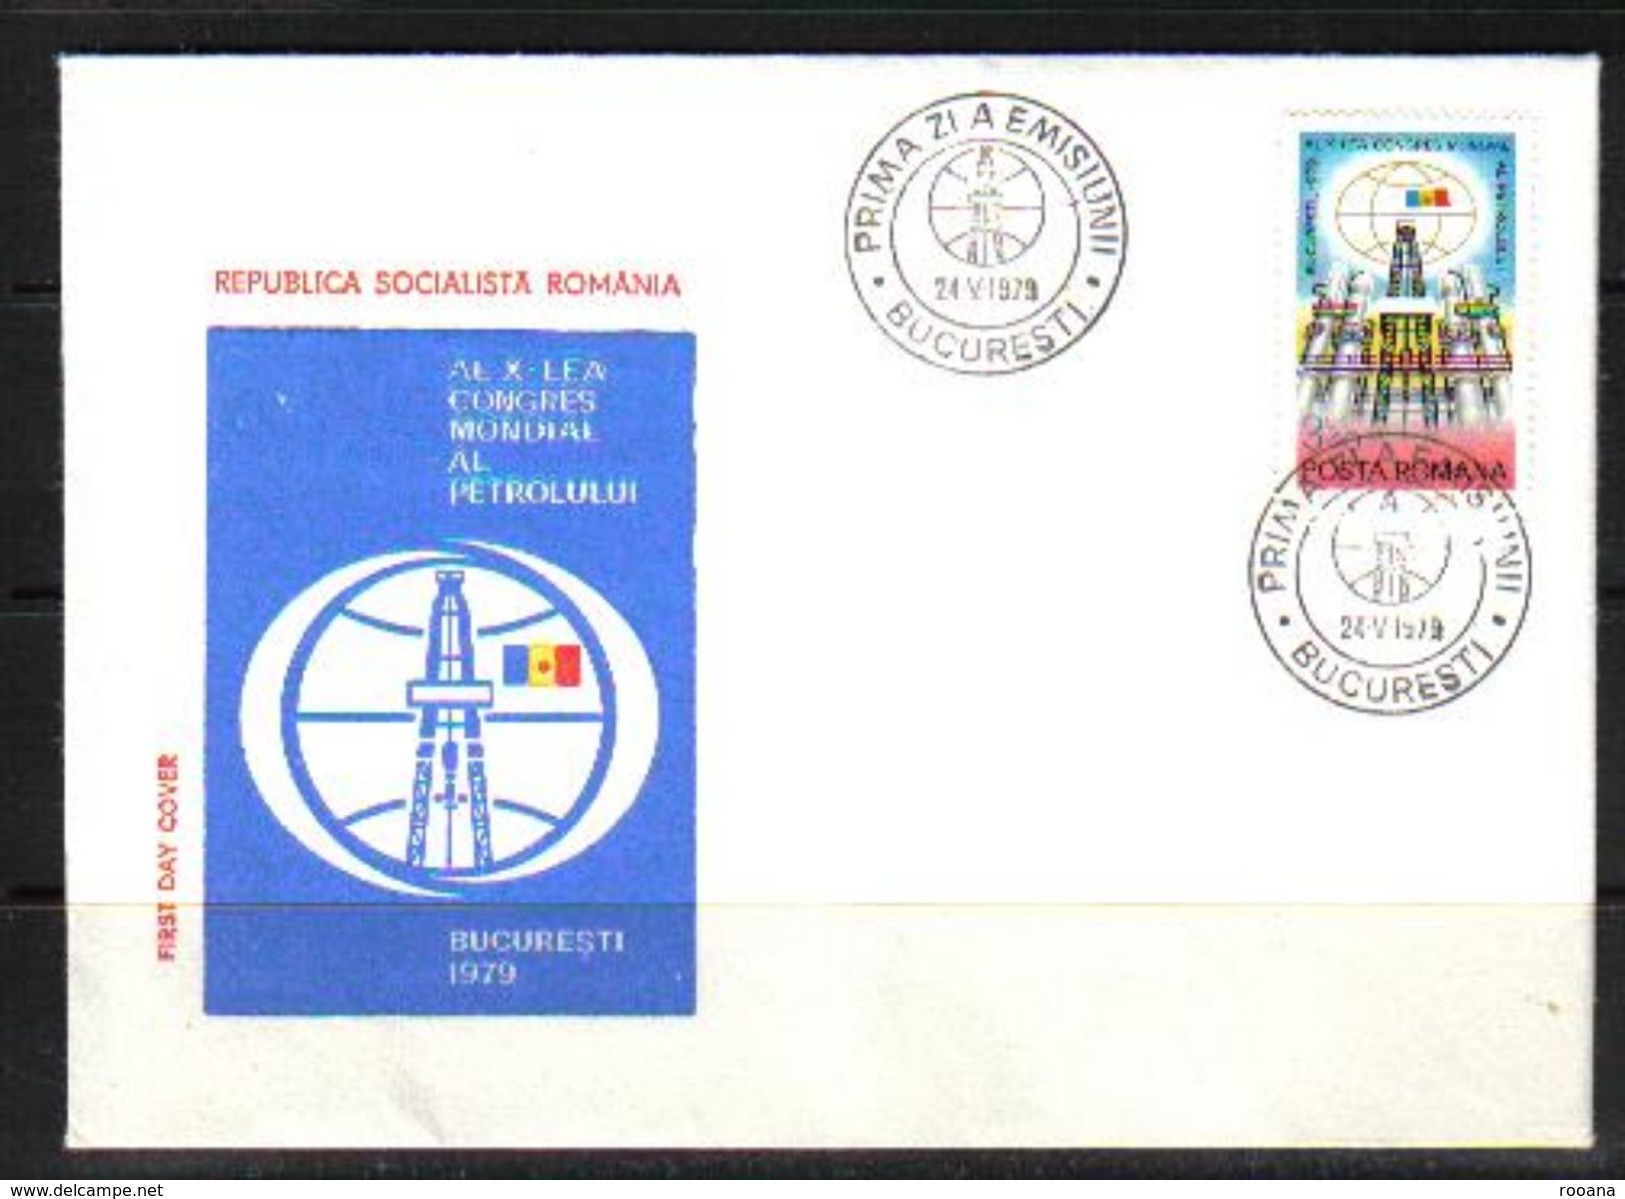 ROMANIA FIRST DAY COVER 1979 - FDC